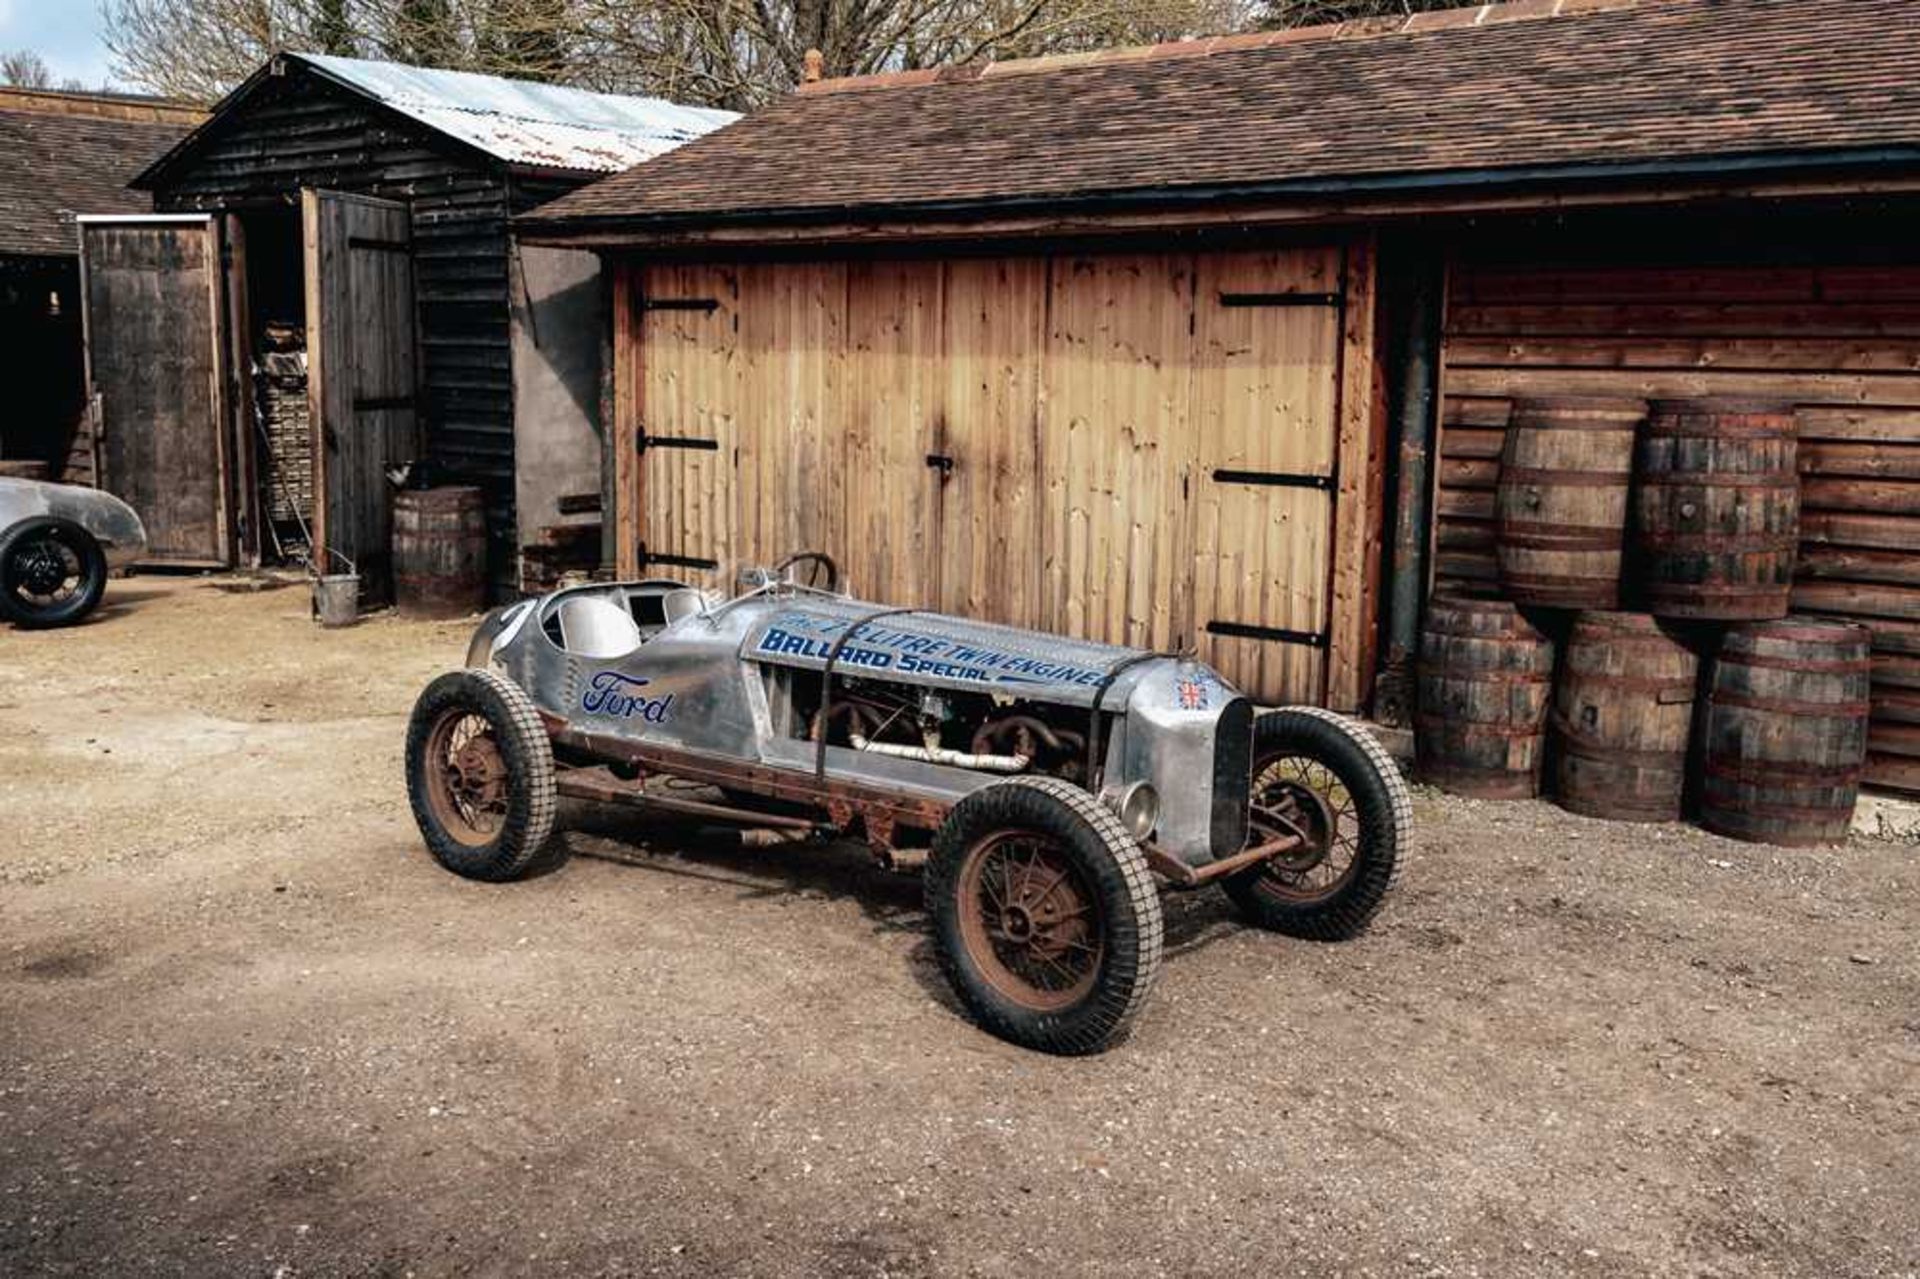 1930 Ford Model A "The Ballard Special" Speedster One off, bespoke built twin-engined pre-war racing - Image 26 of 94